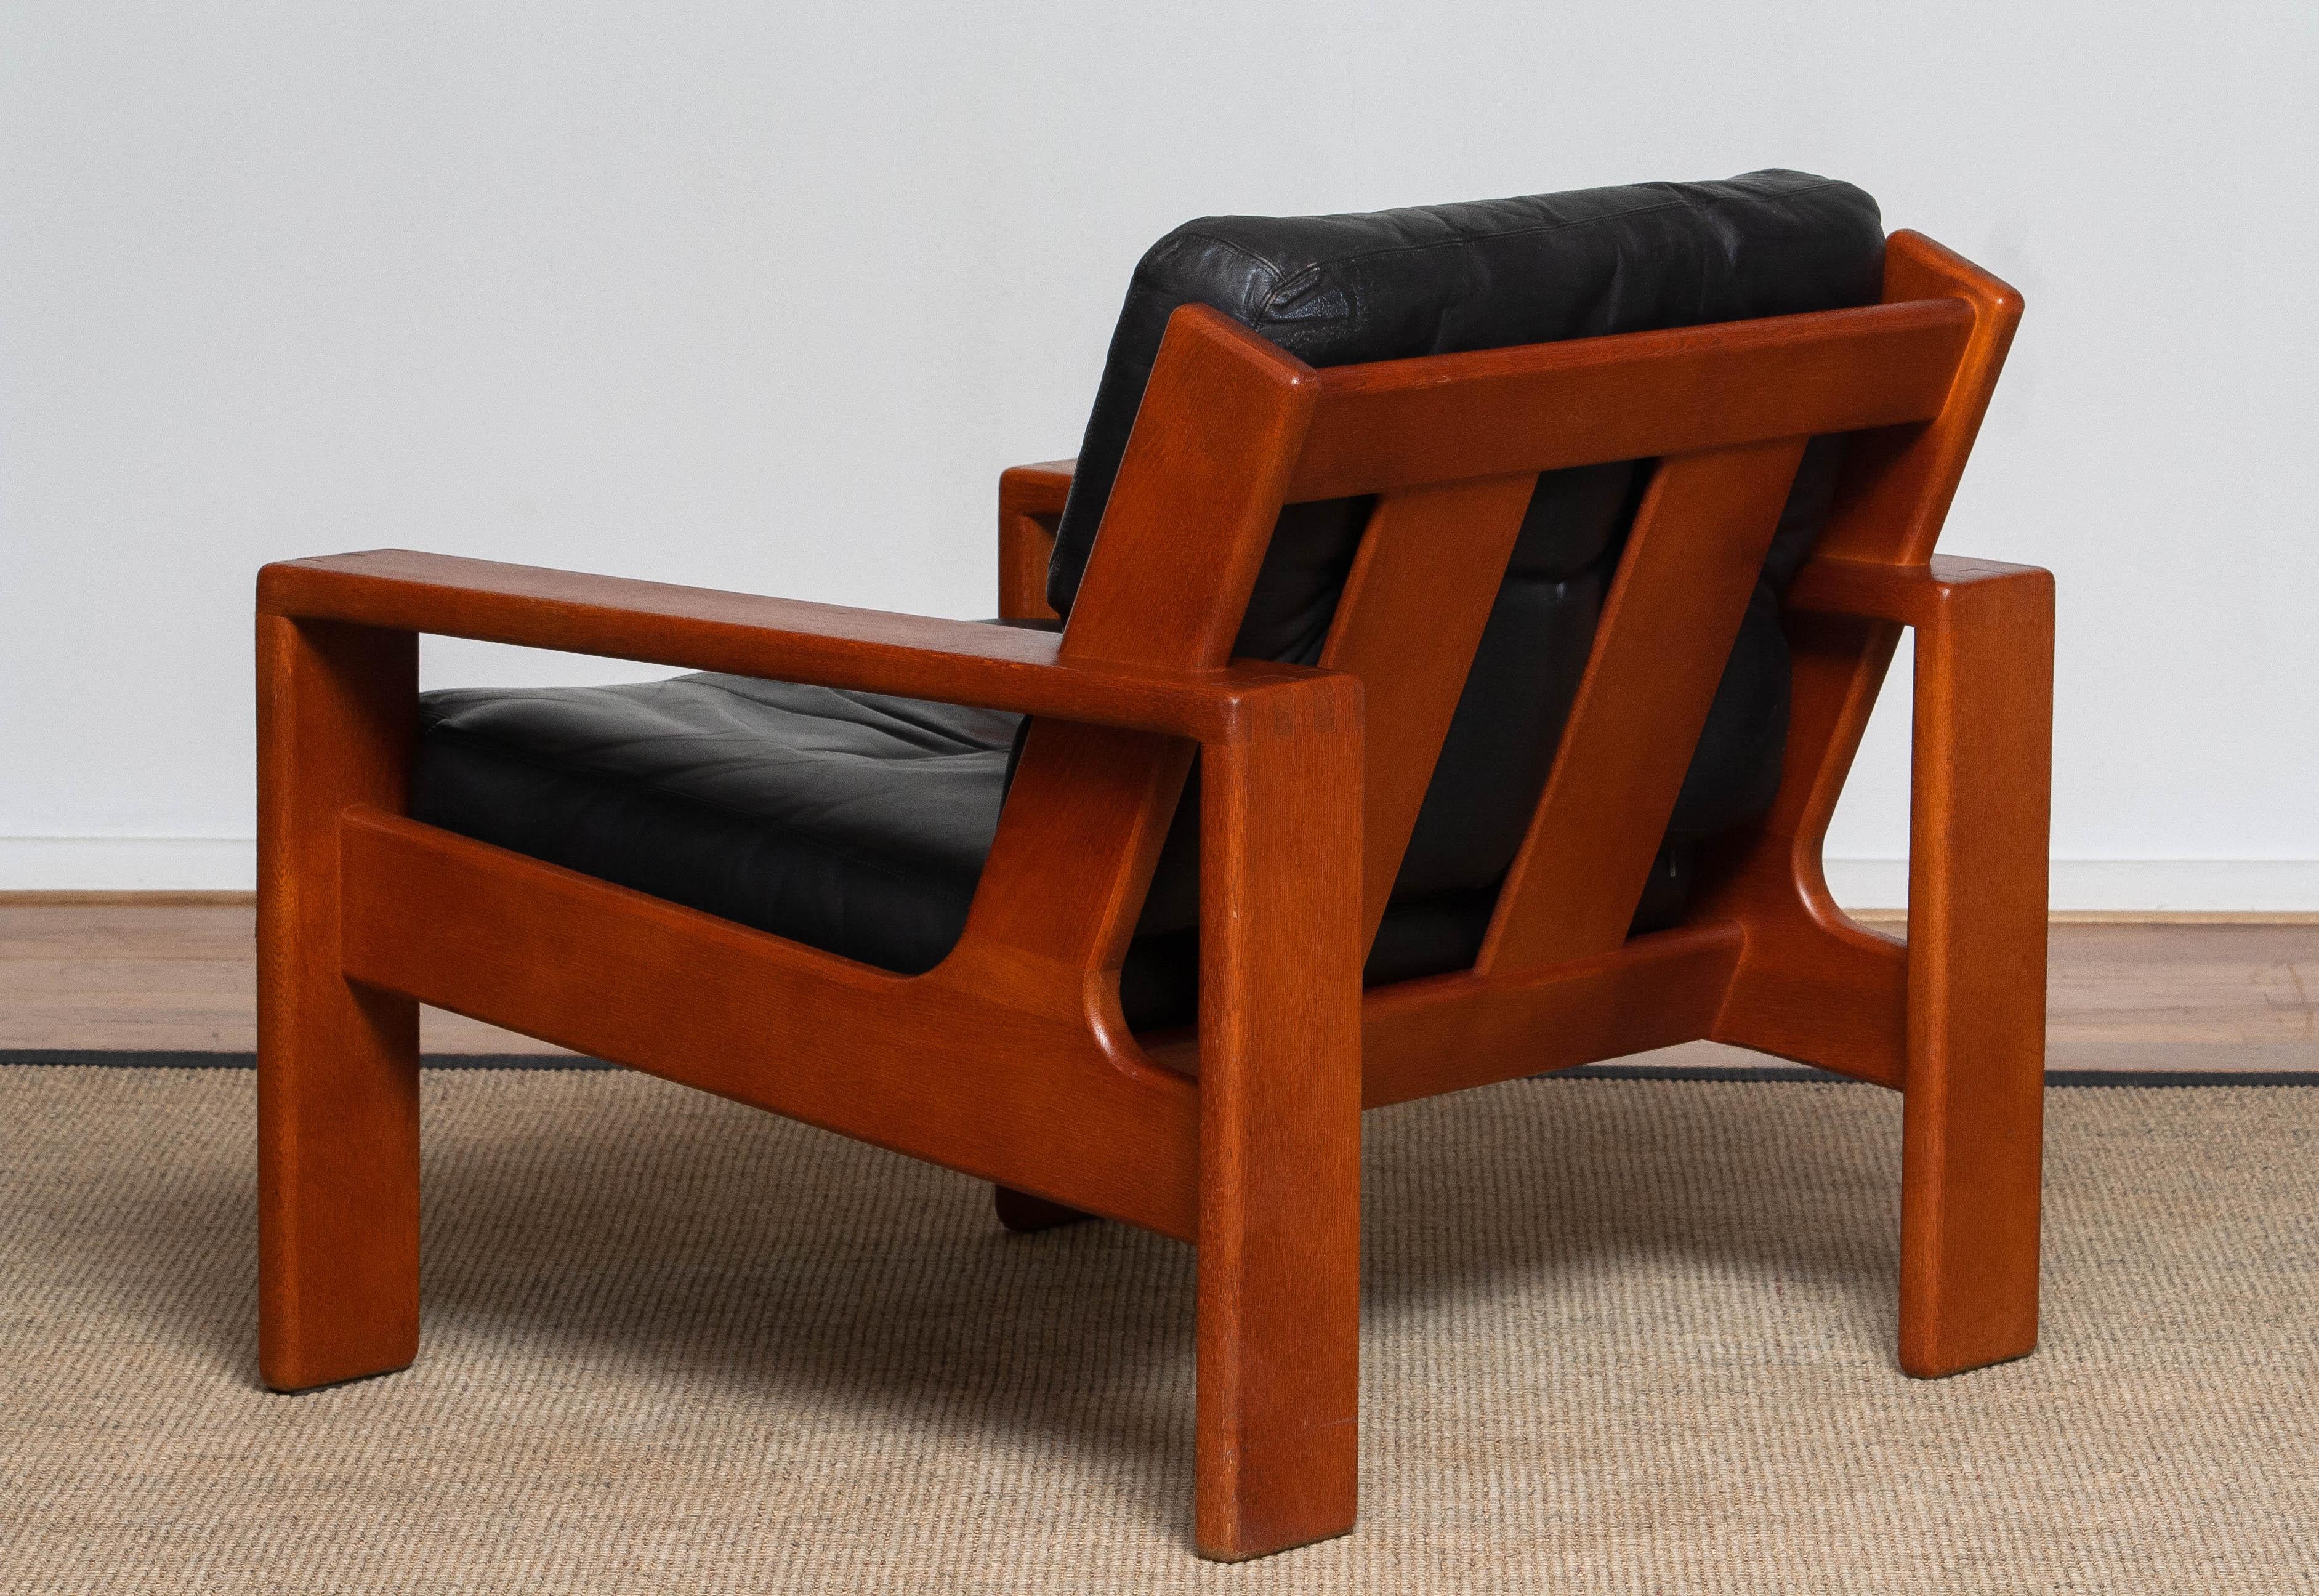 Brutalist 1960s, Teak and Black Leather Cubist Lounge Chair by Esko Pajamies for Asko